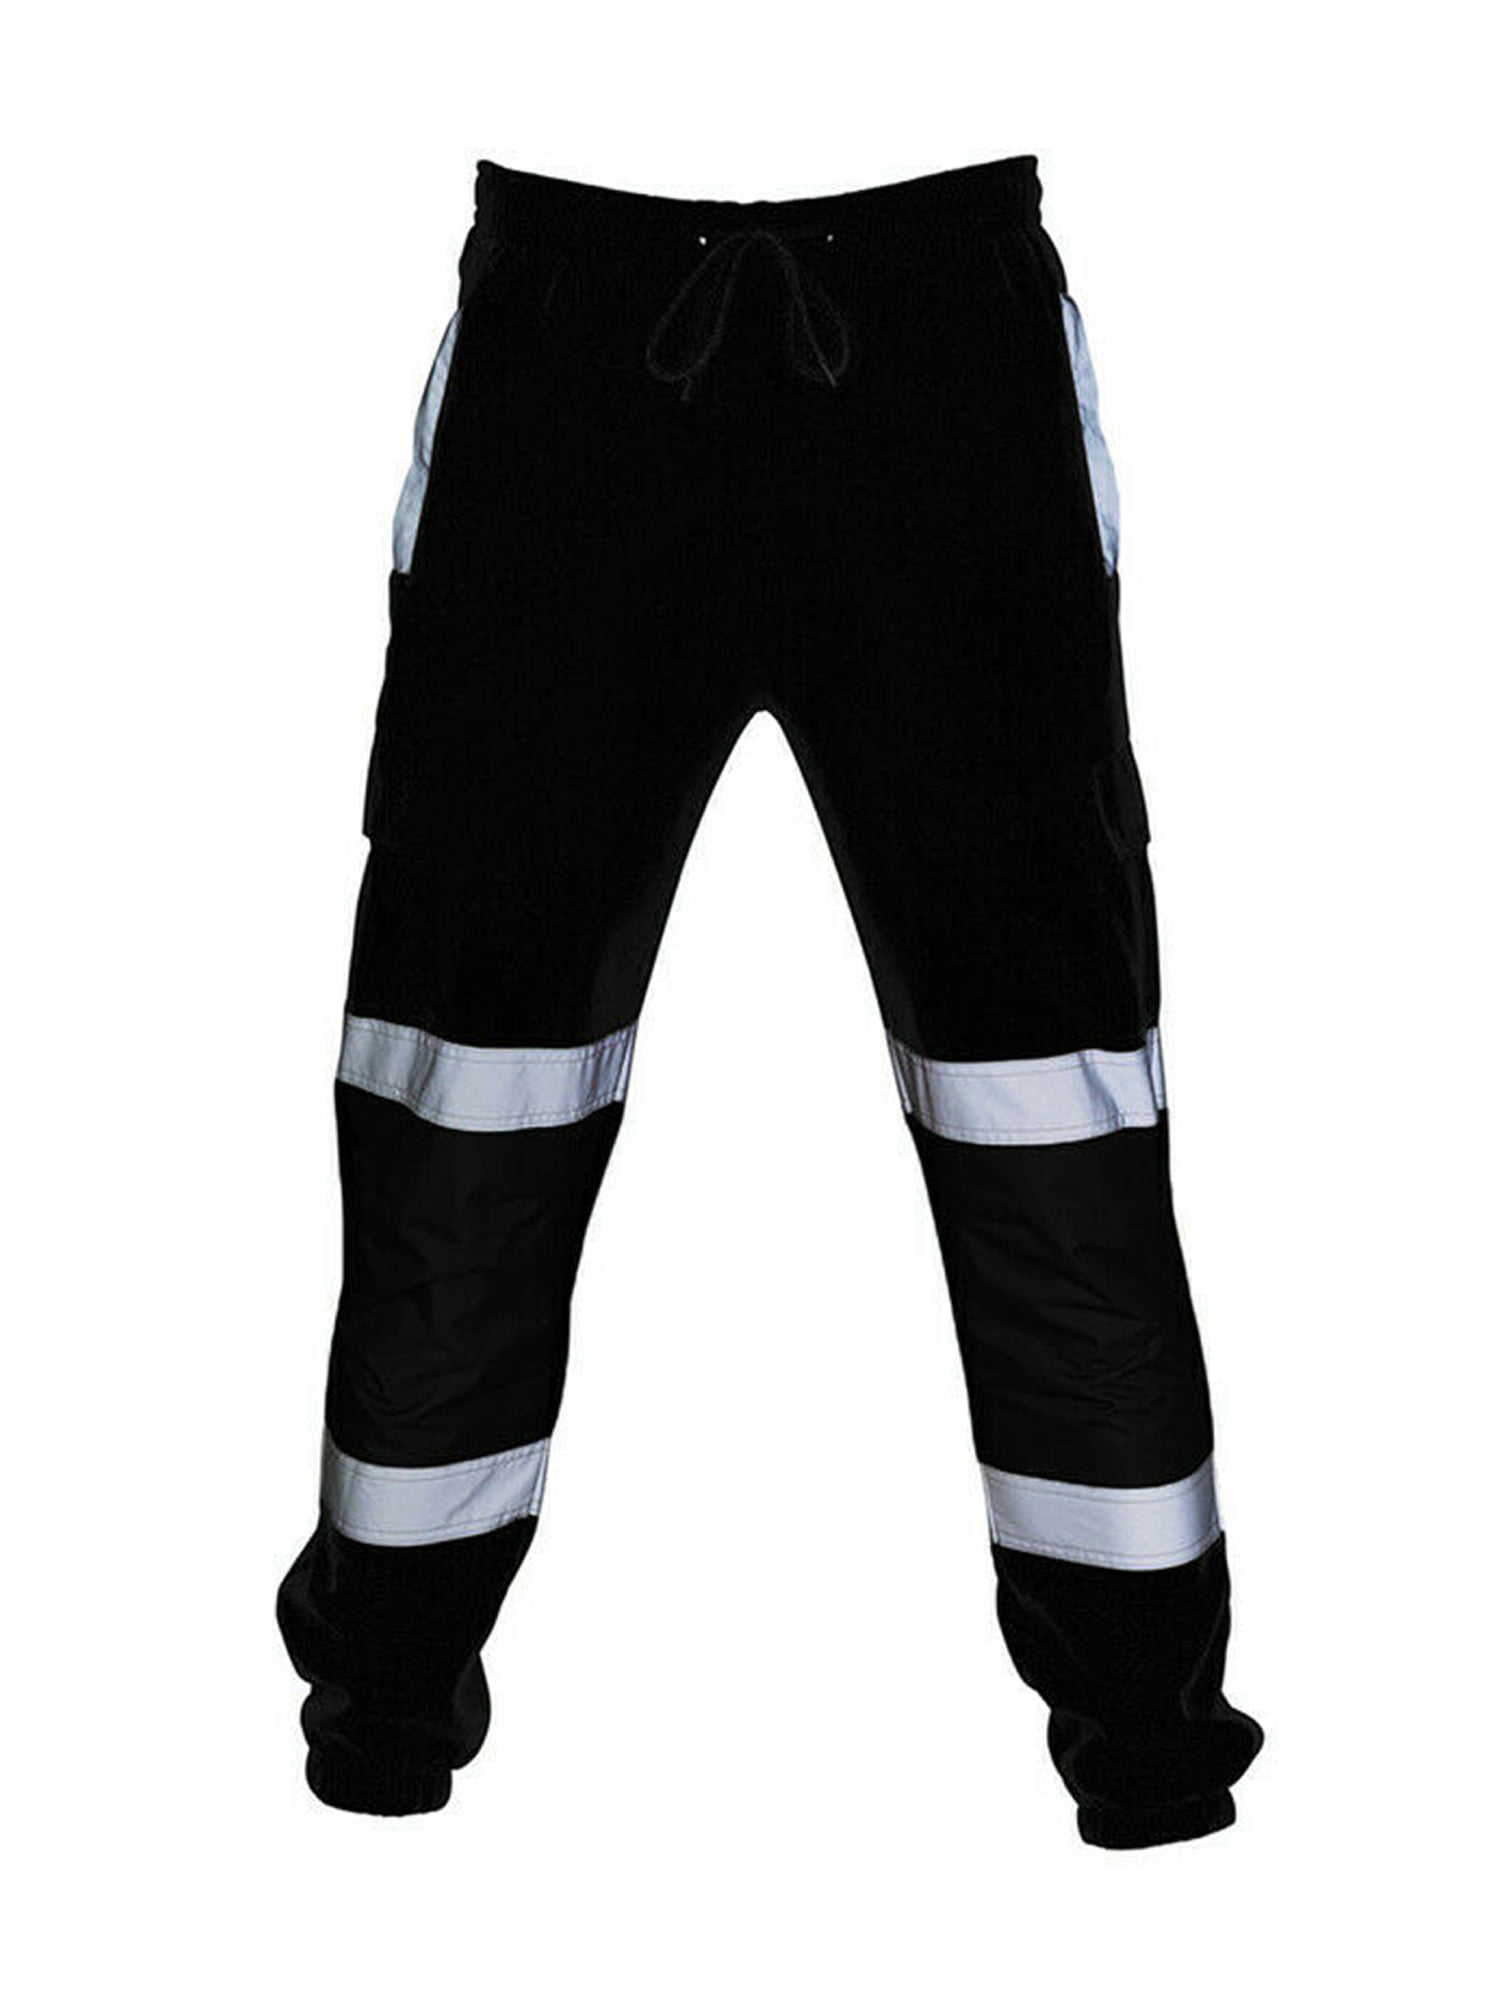 High Viz Visibility Hi Vis Work Trousers Sports Safety Joggers For Jogging Pants 